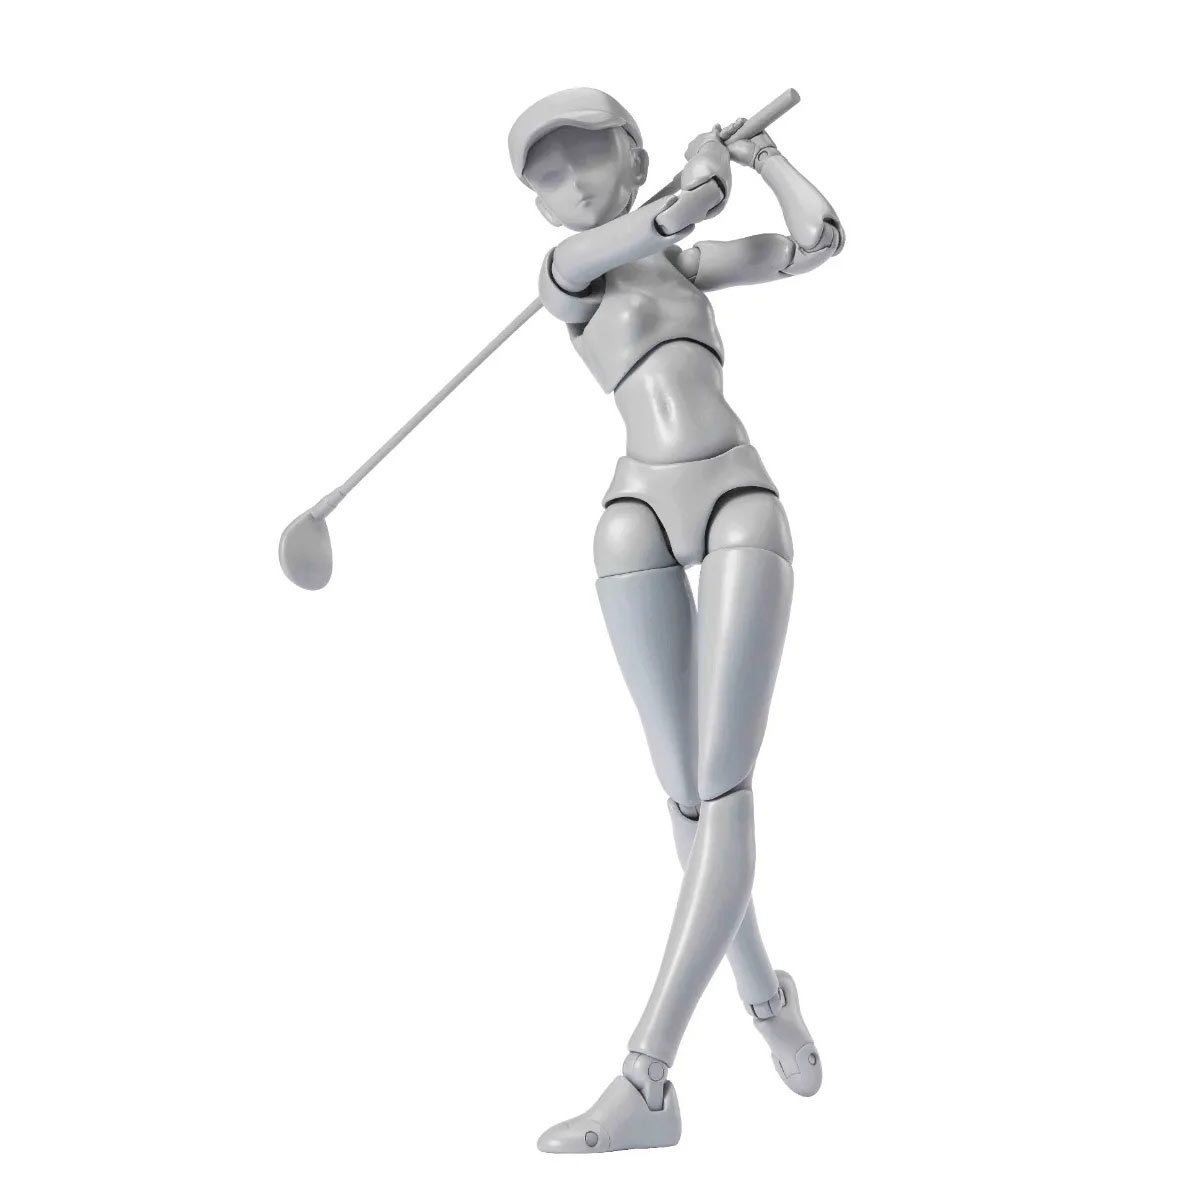 Body-Chan Sports Edition DX Set Birdie Wing Version S.H.Figuarts